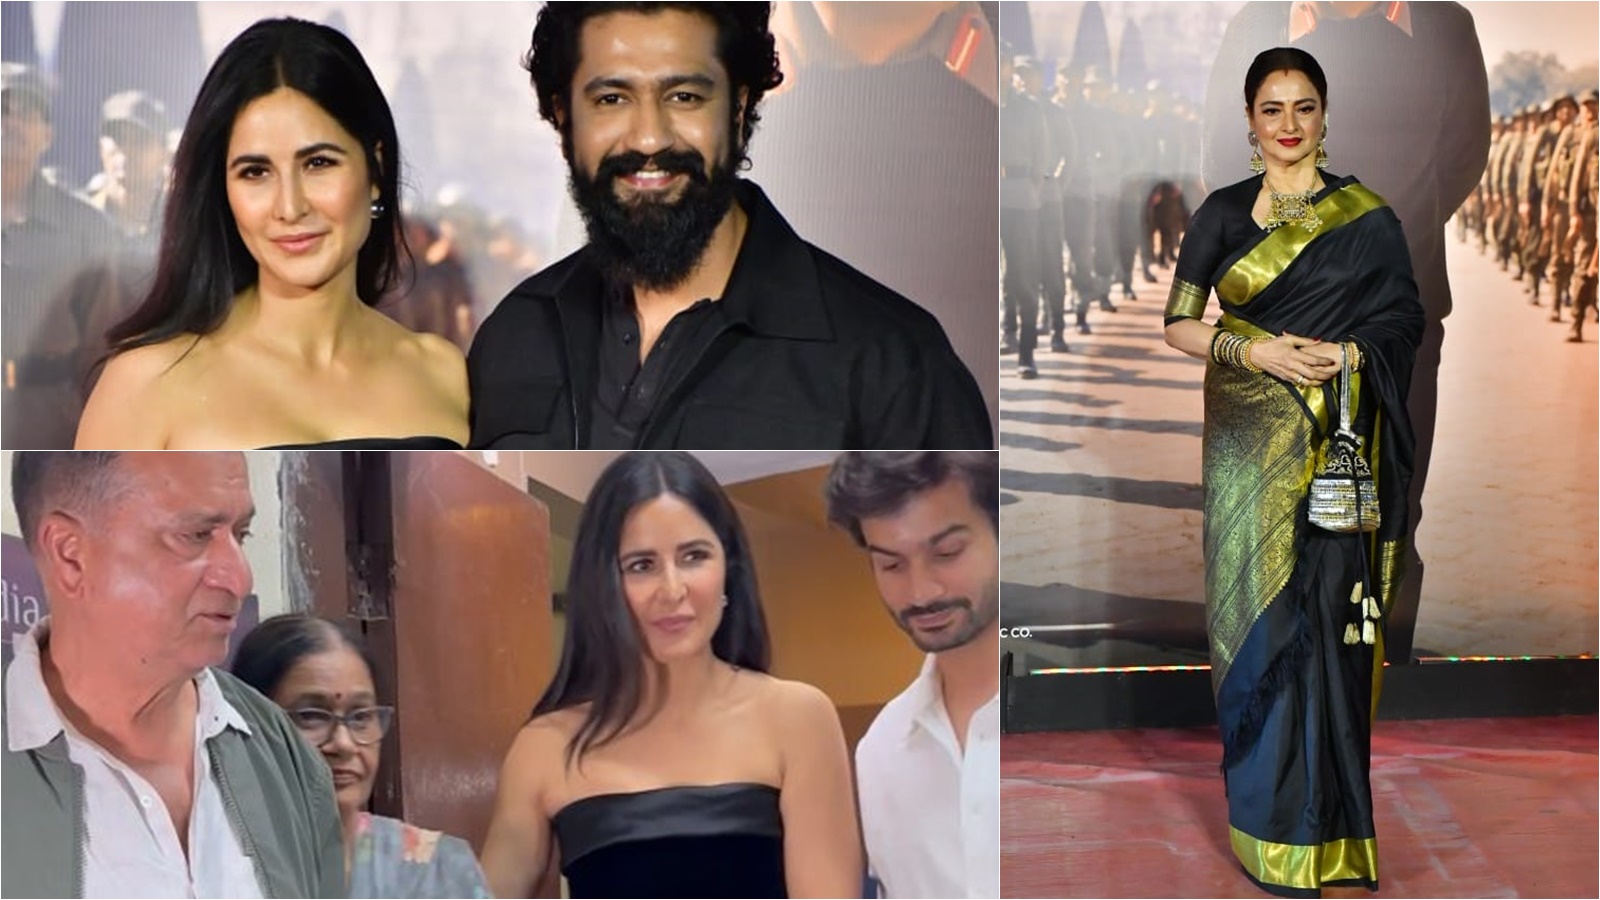 Doting daughter-in-law Katrina Kaif tends to Vicky Kaushal's parents, Rekha  salutes Sam Bahadur poster. See photos and videos from premiere event |  Bollywood News - The Indian Express